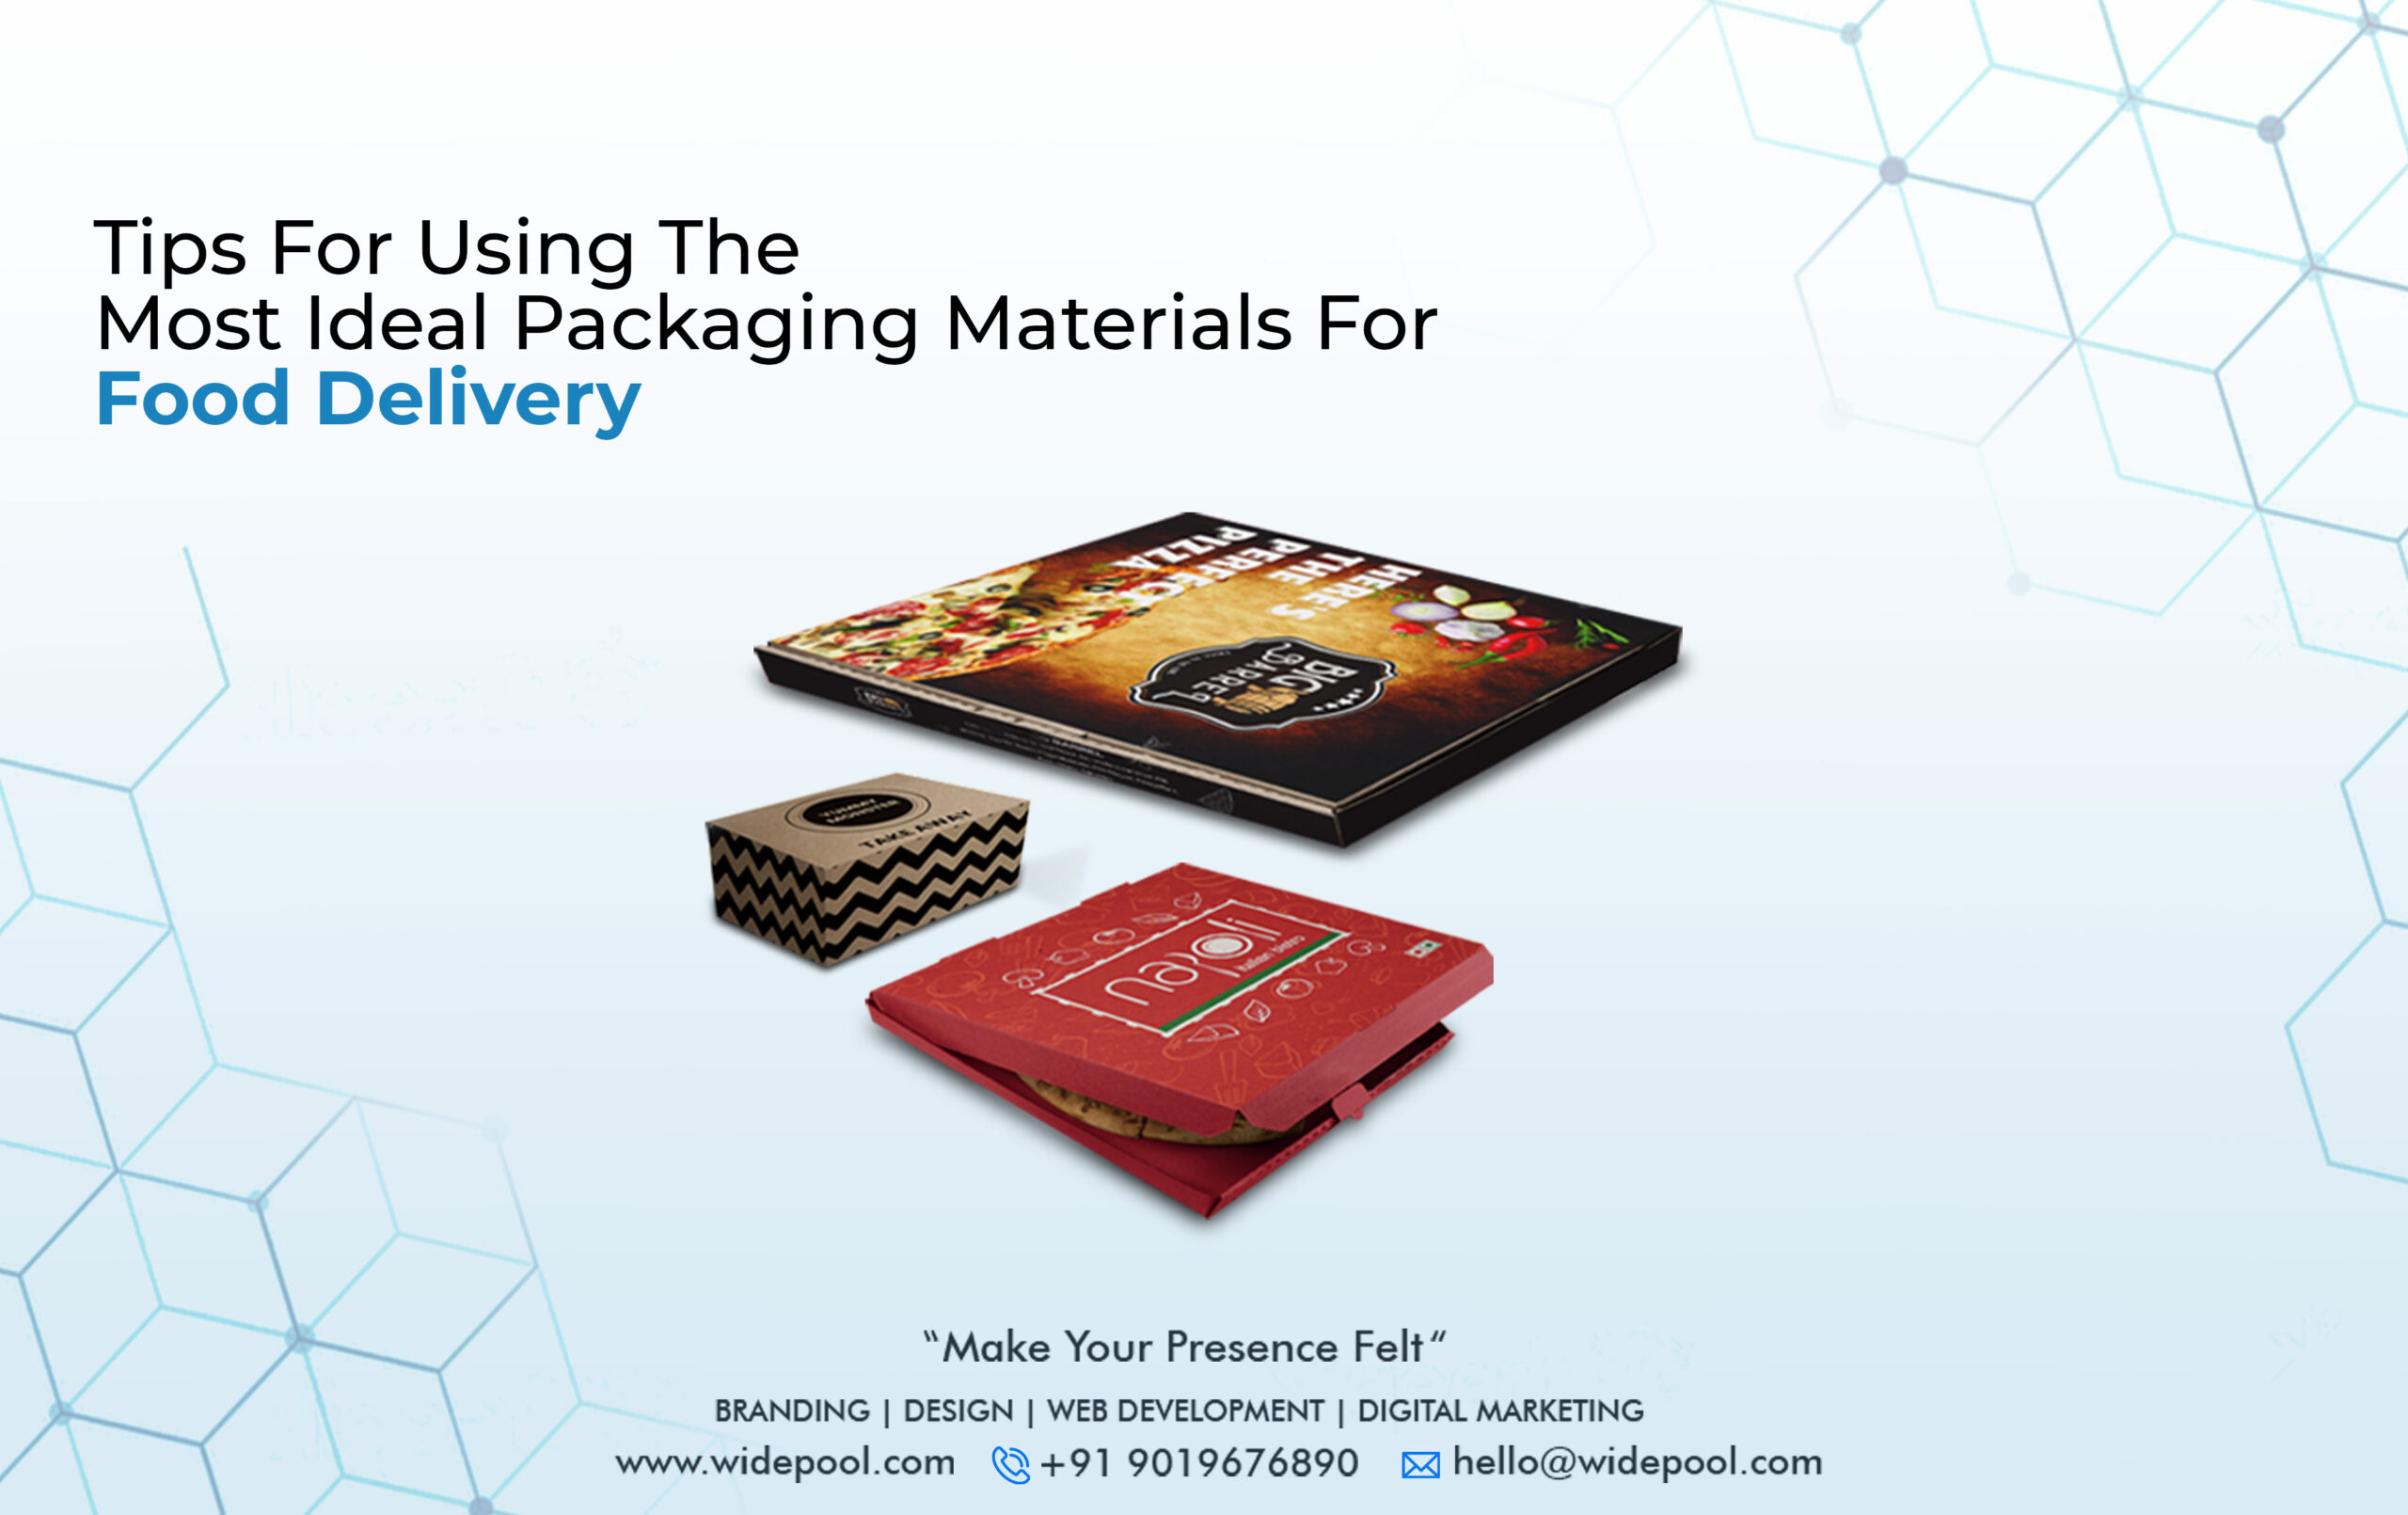 Tips for Using the Most Ideal Packaging Materials for Food Delivery